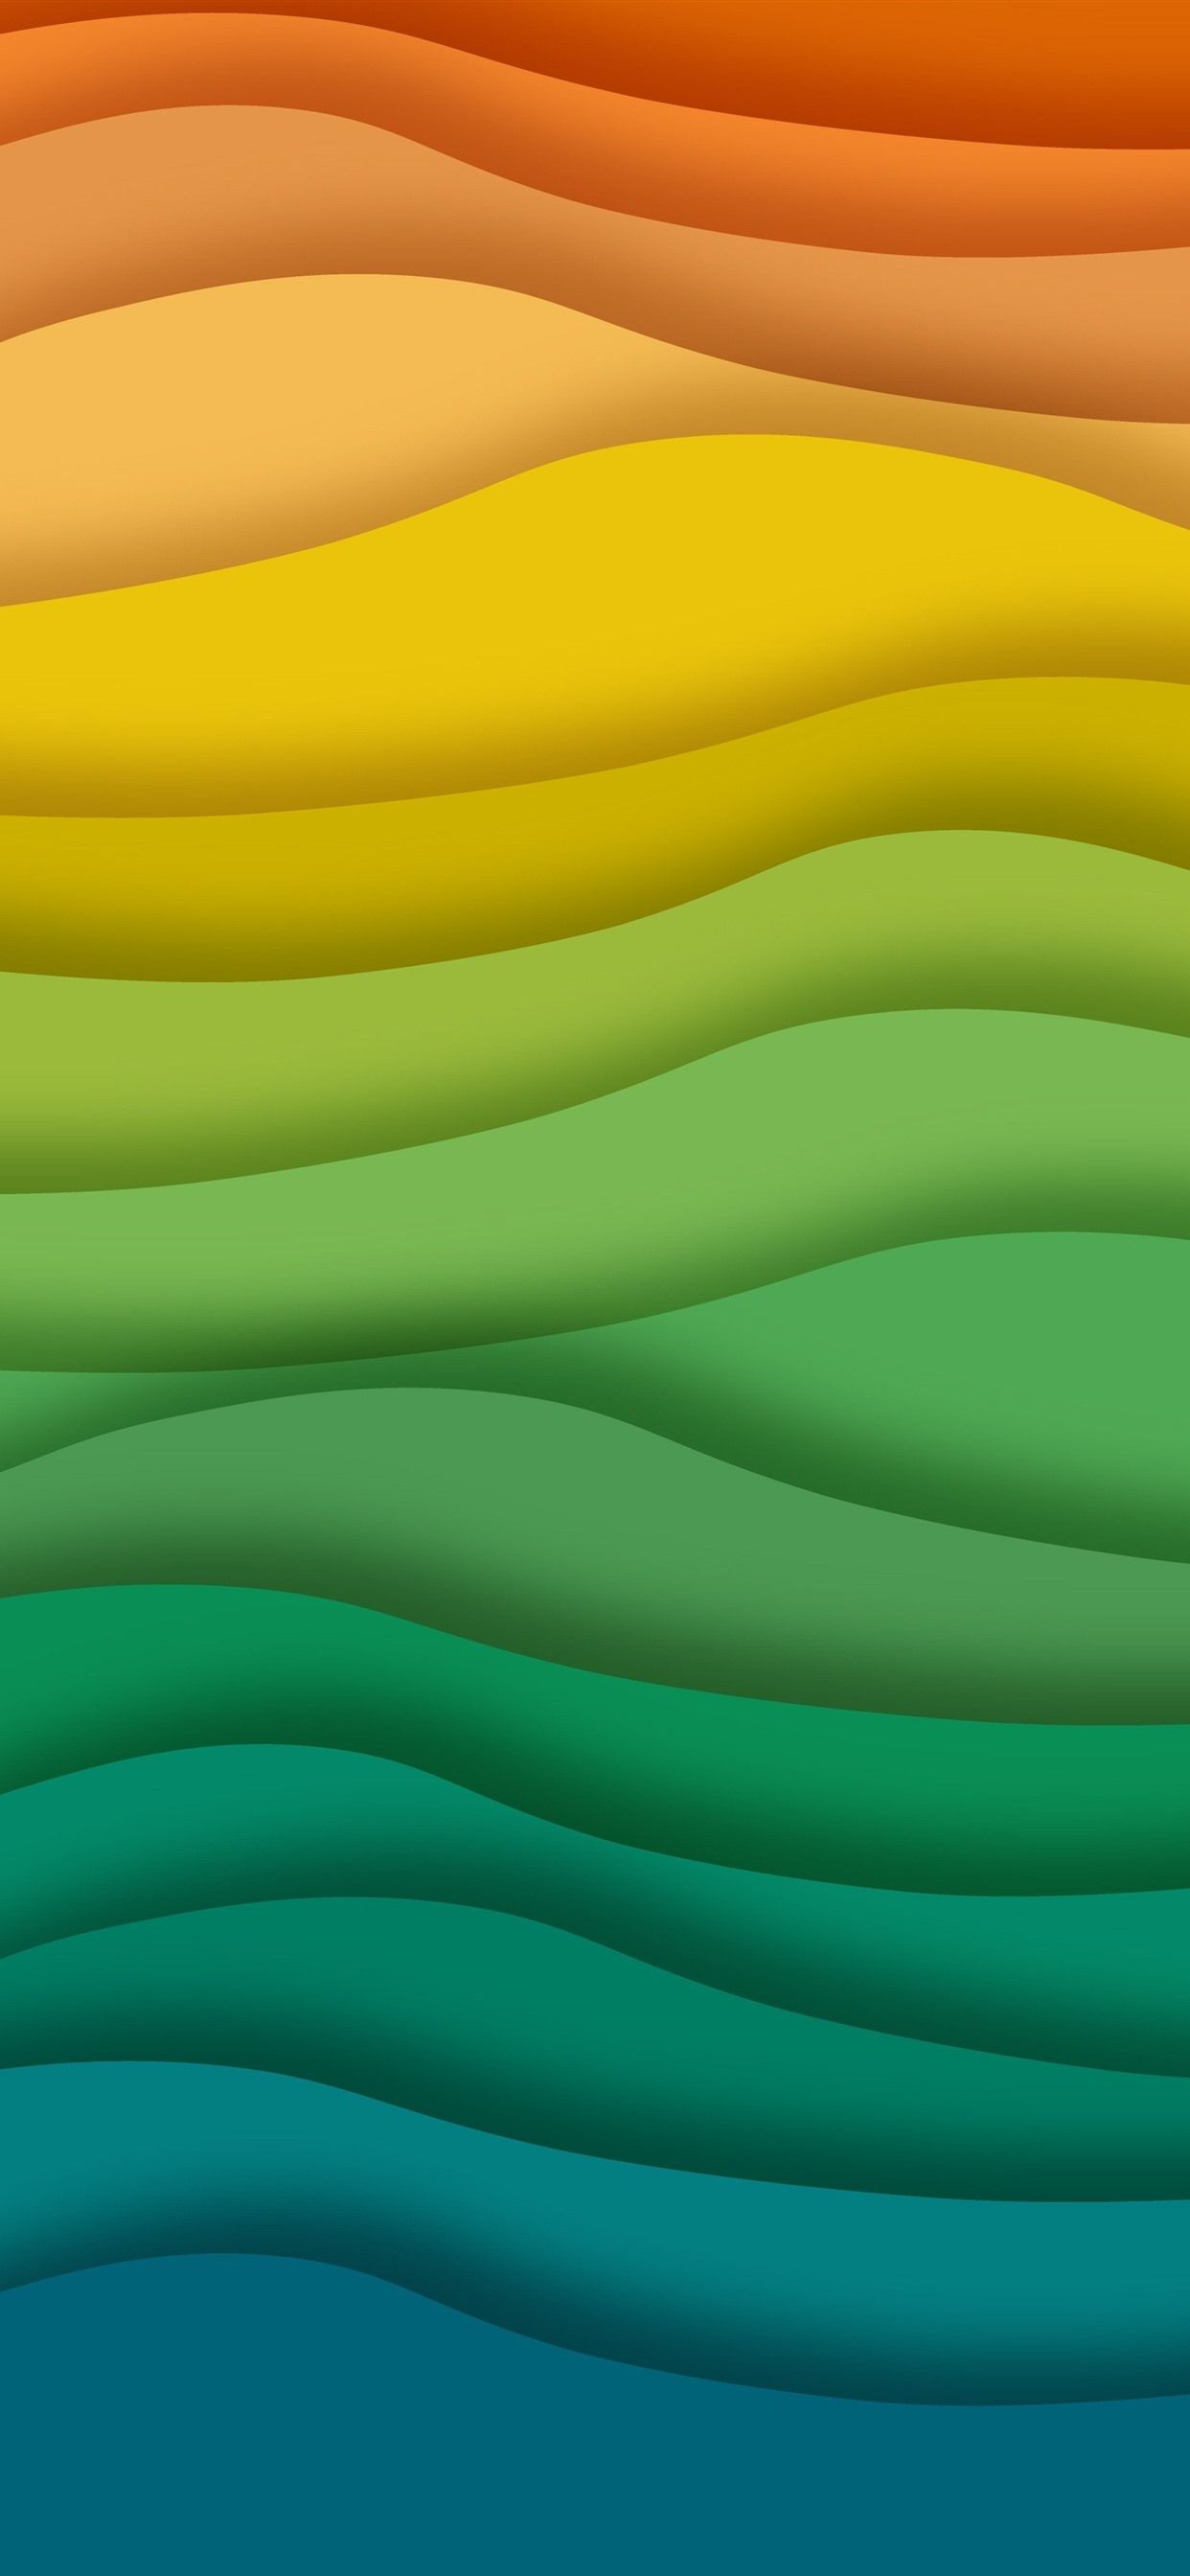 Wallpaper Rainbow waves, abstract 5120x2880 UHD 5K Picture, Image